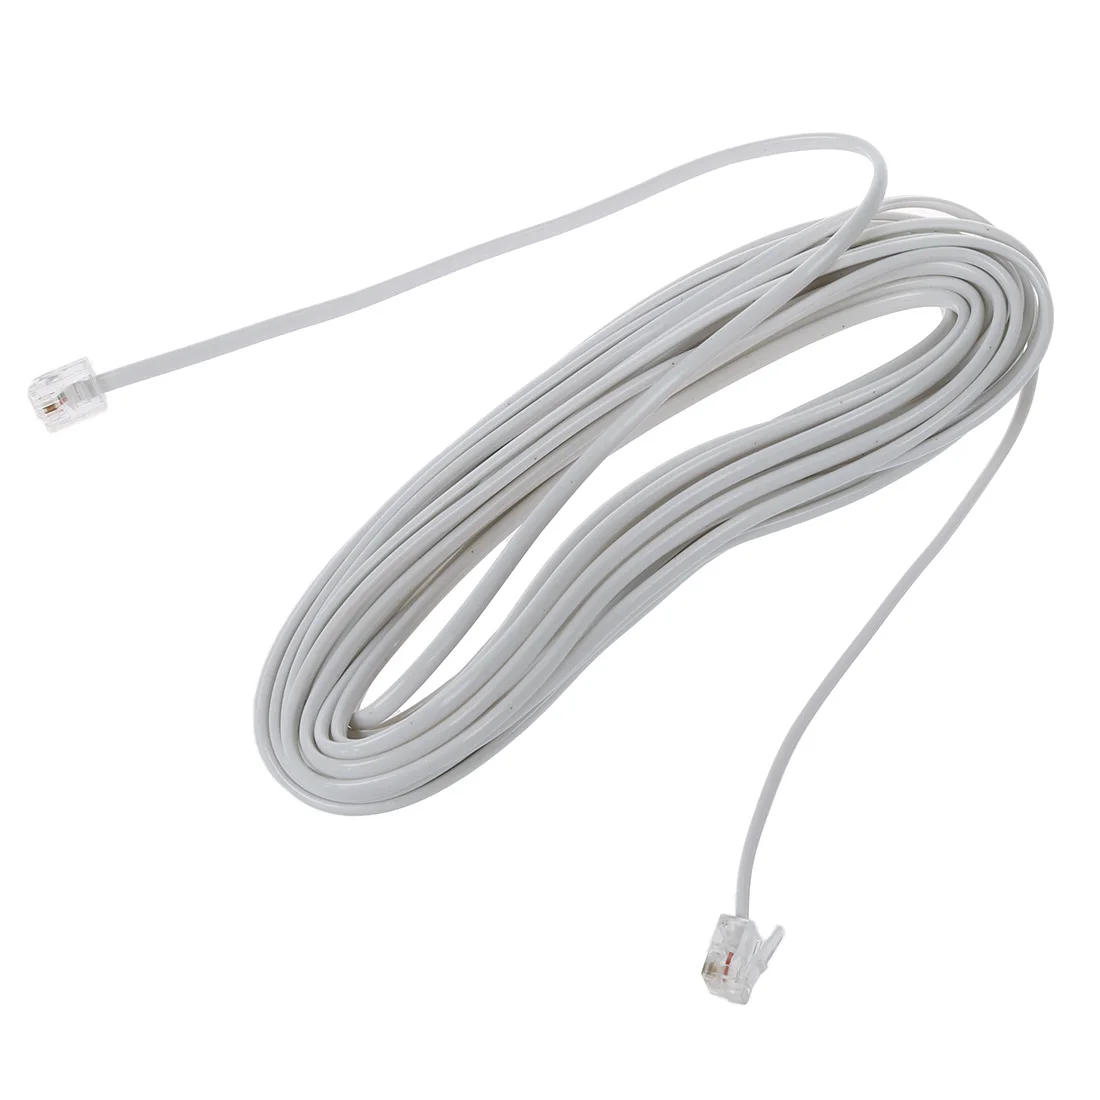 

9M 30ft RJ11 6P2C Modular Telephone Phone Cables Wire White